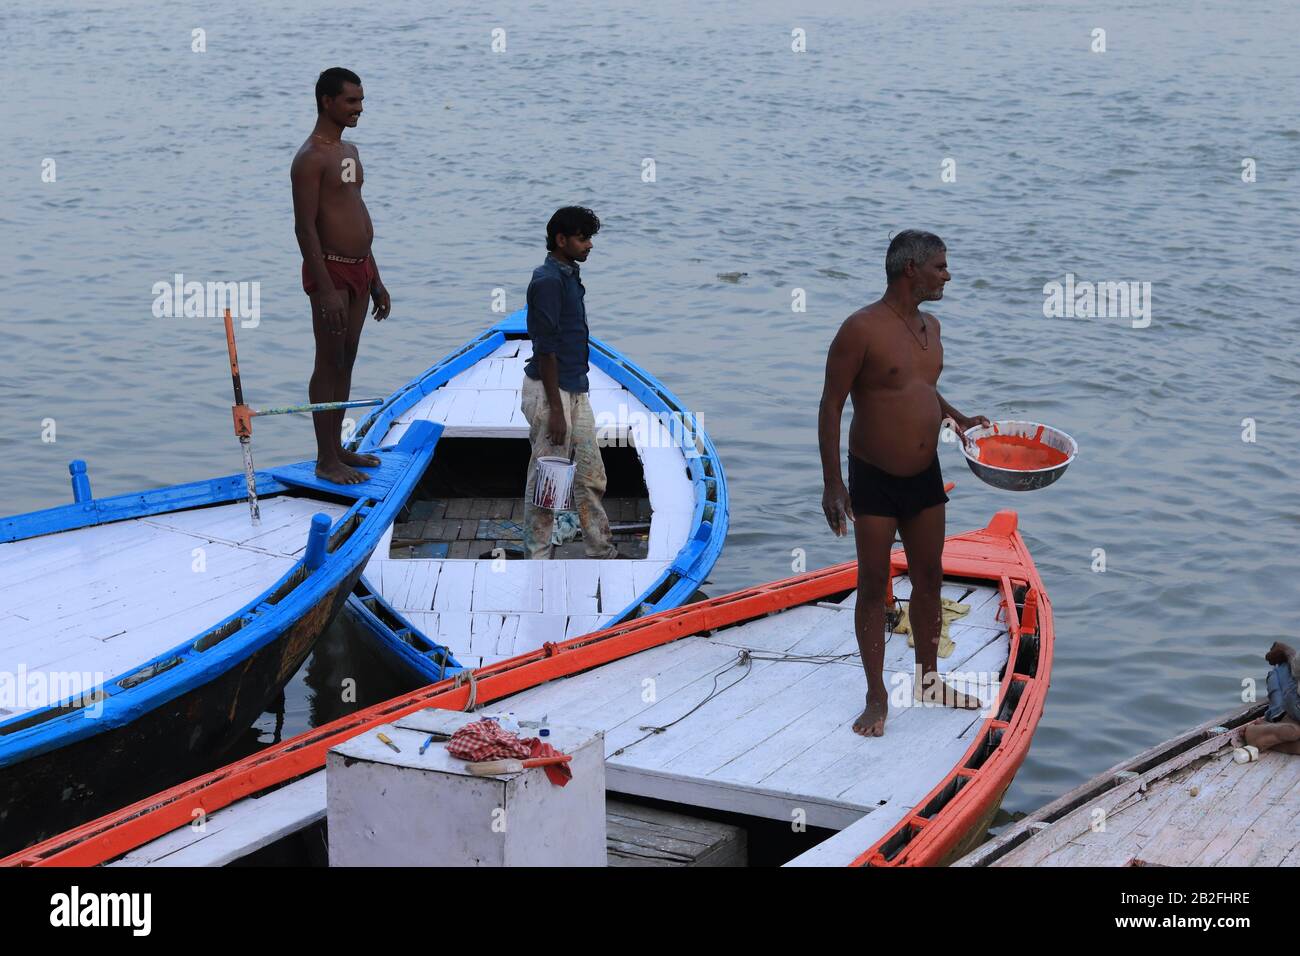 Three men on the their boats at Ganga River Stock Photo